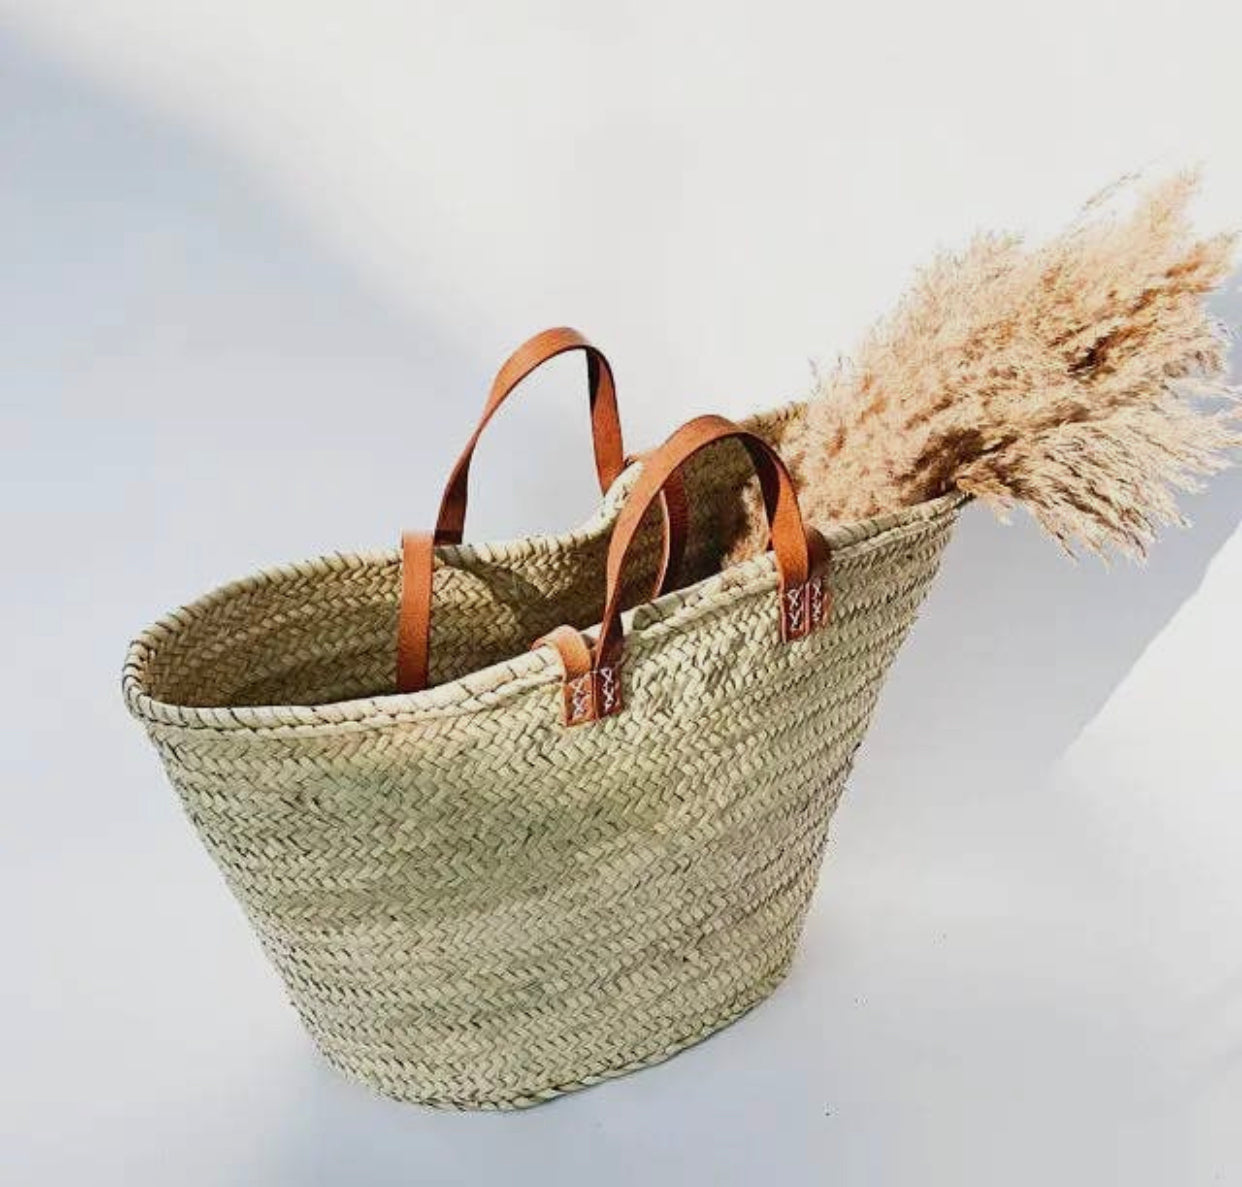 French Baskets  Handmade Straw French Baskets and Wholesale Straw